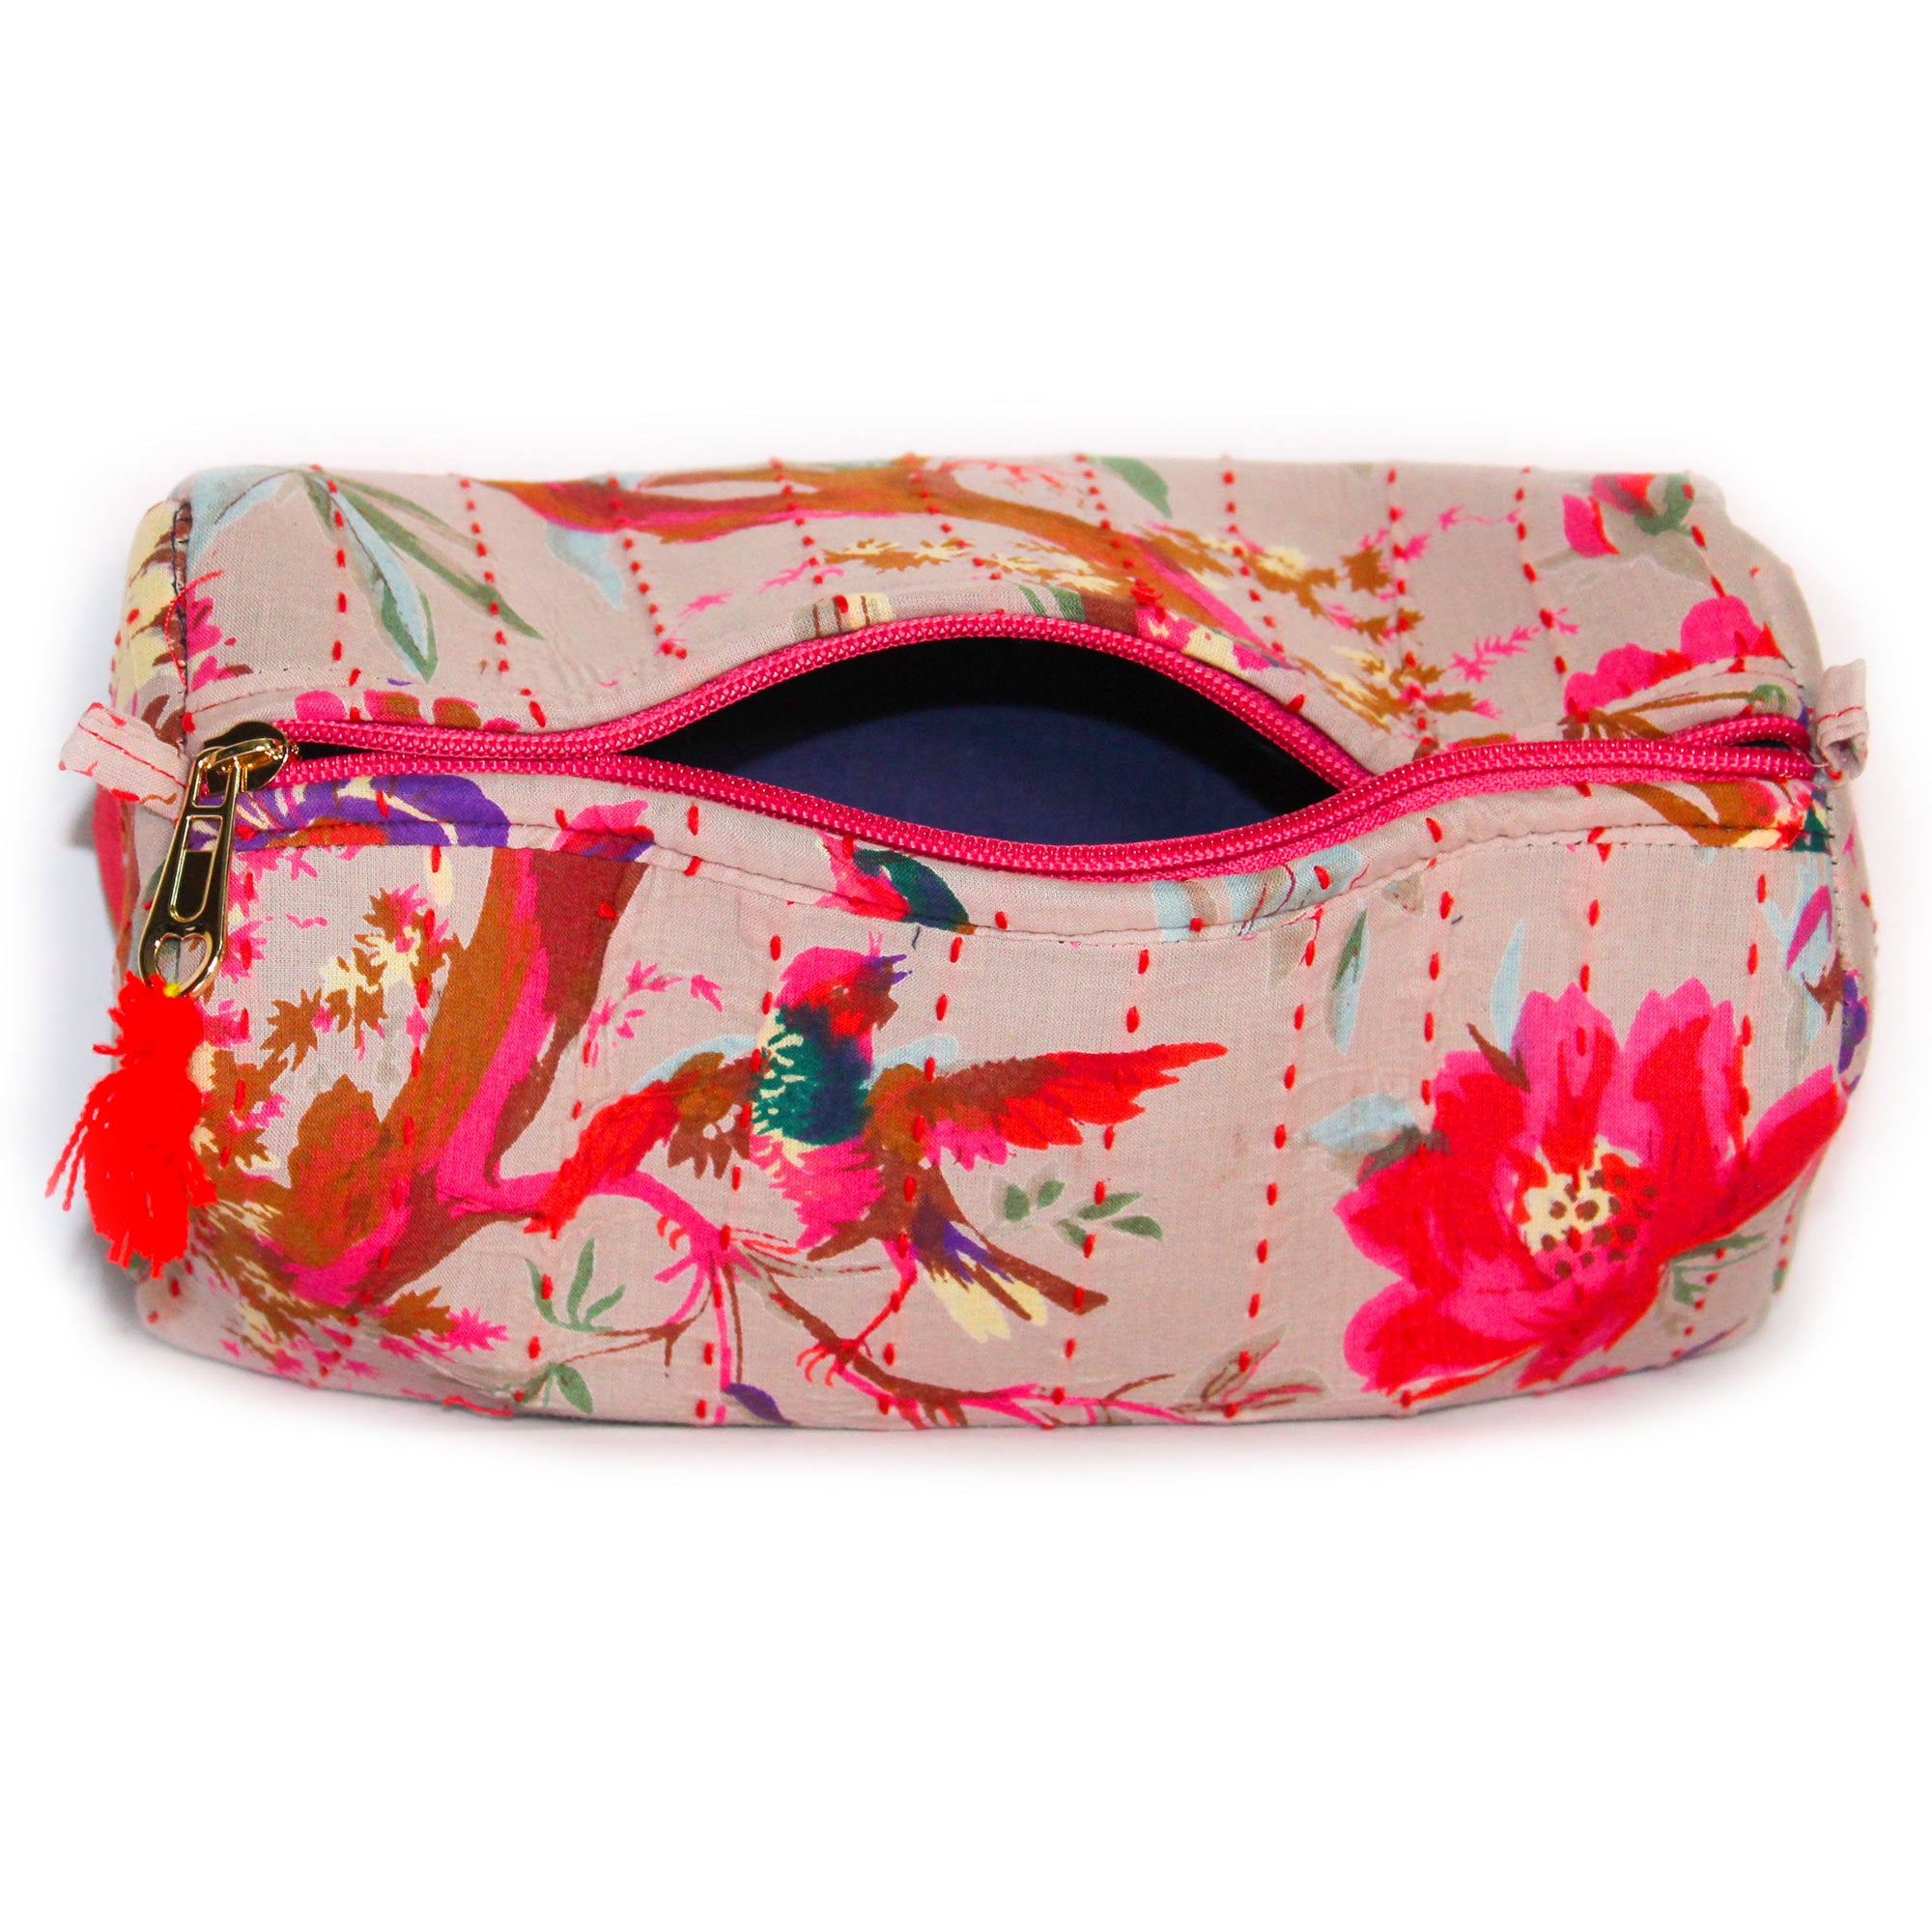 TMN - Women Peach Printed With Embroidered Vegan Leather Cosmetic Pouch